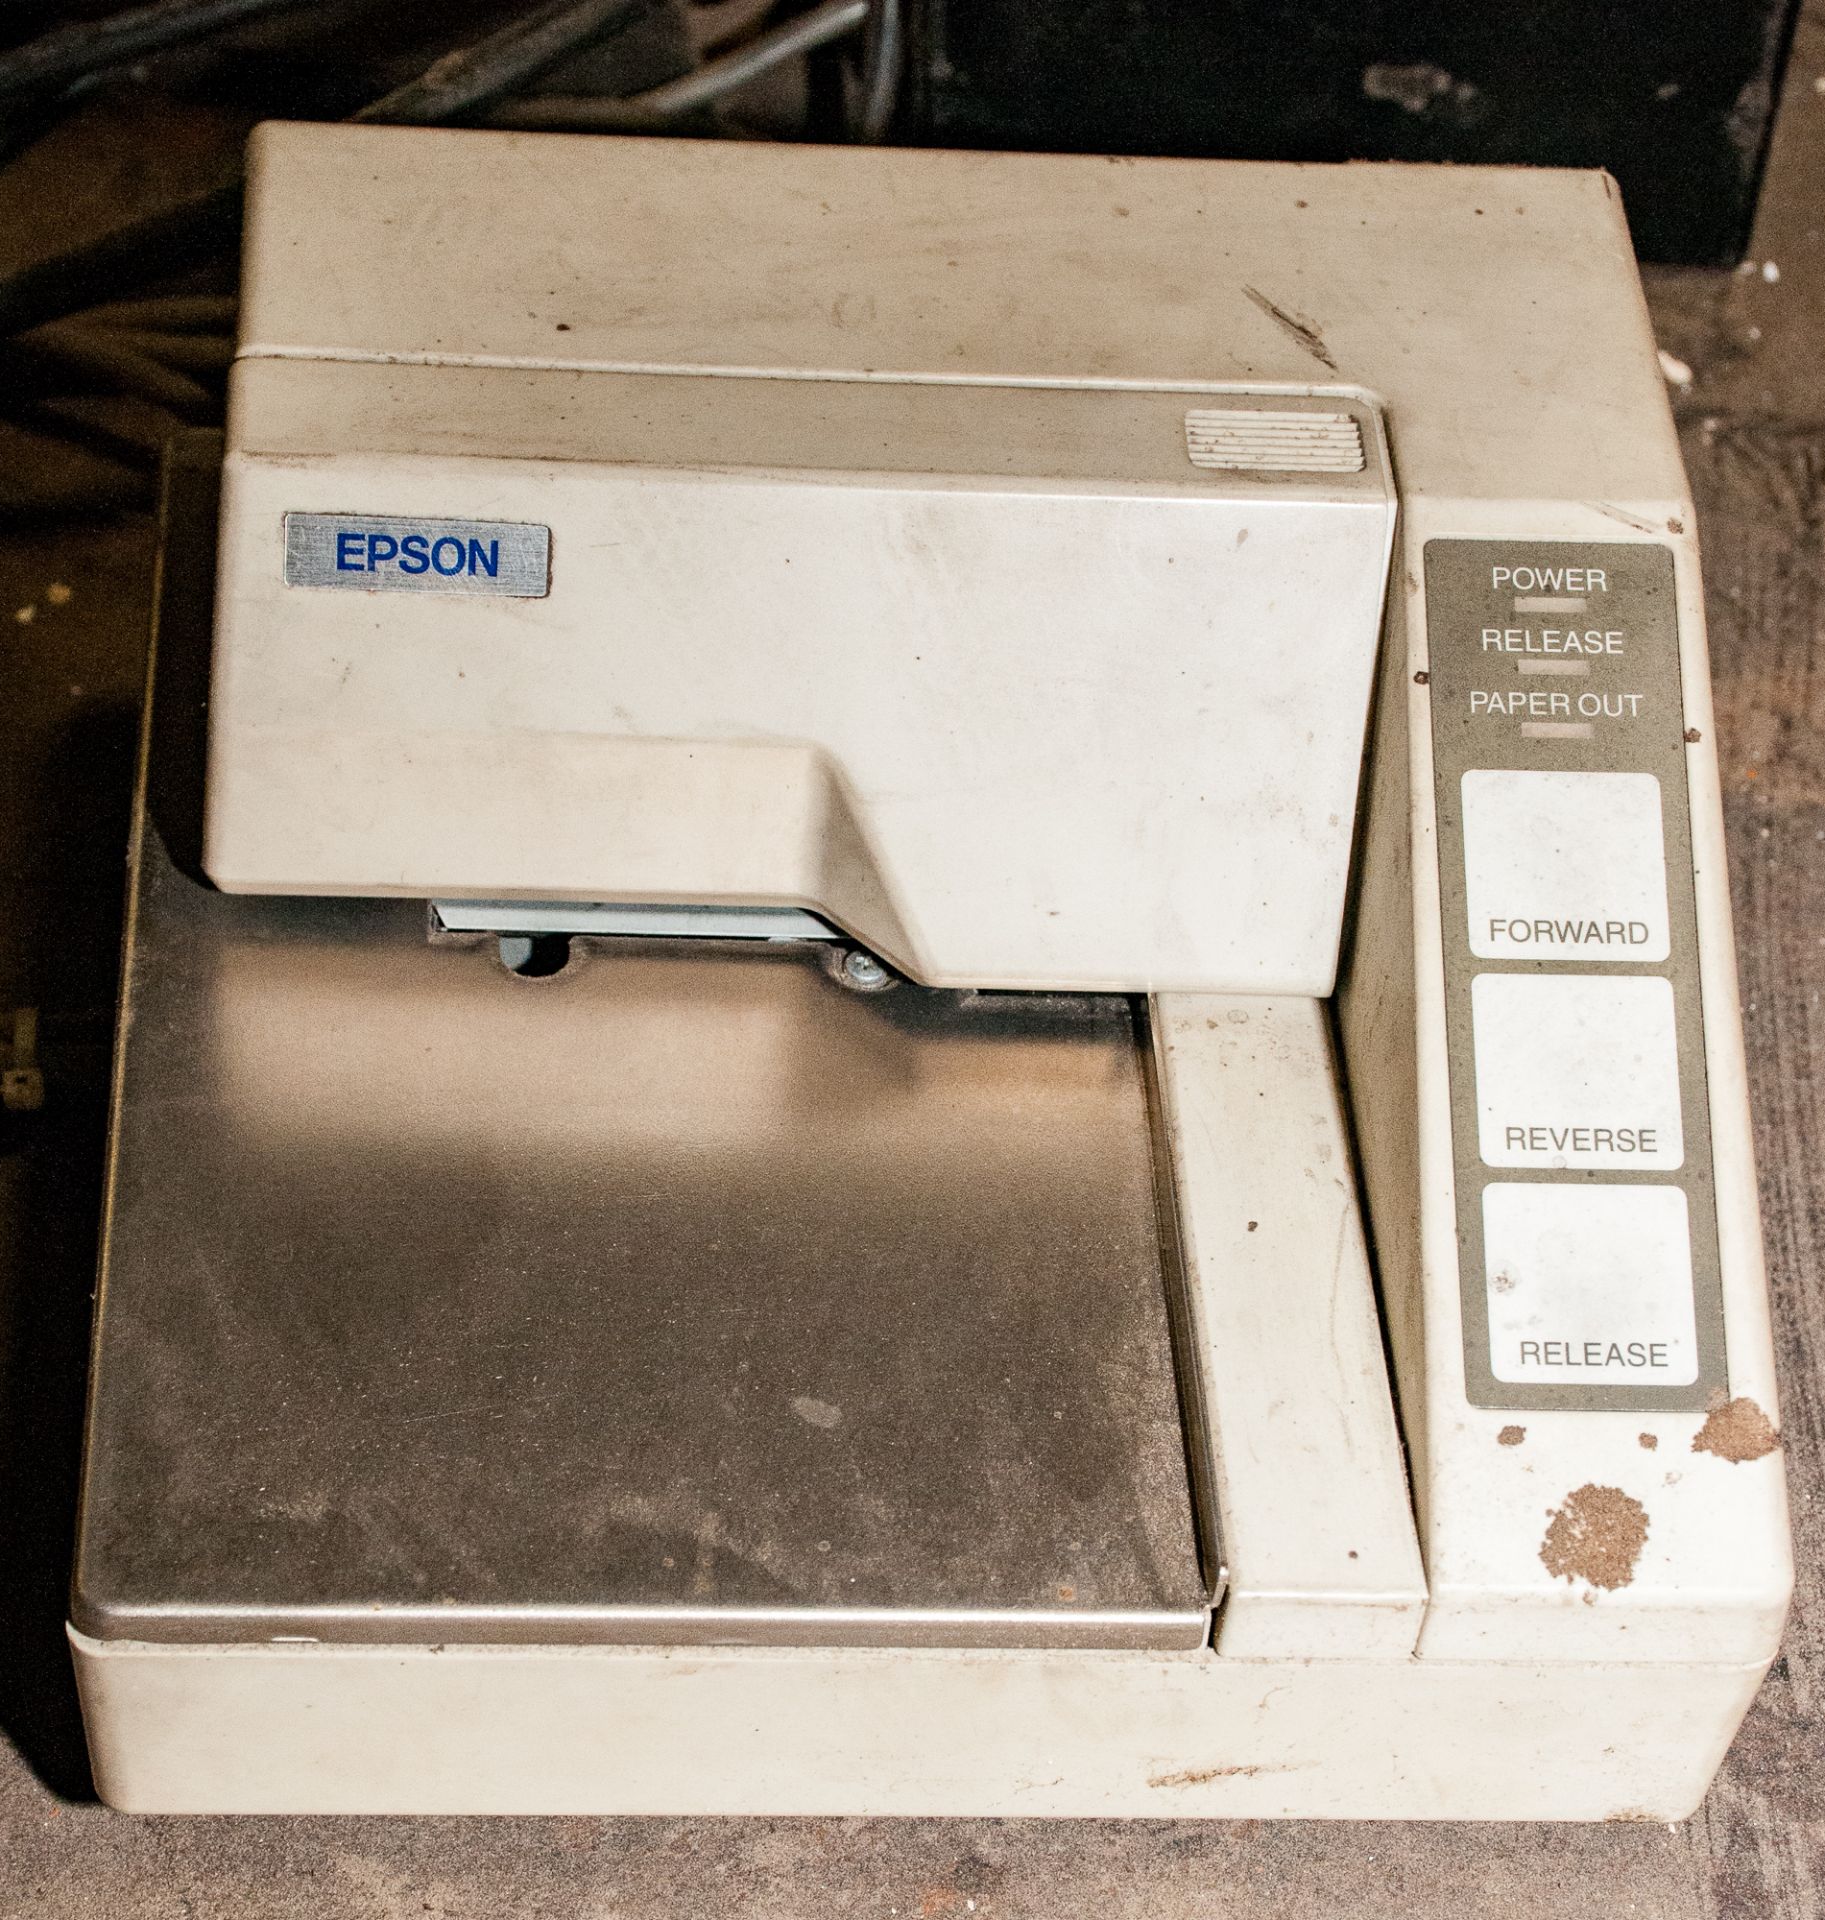 Scale Table 82 1/2" X 107 1/2" w/ Fairbanks Readout and Epson Printer, 10,000 lb. Cap. - Image 4 of 5